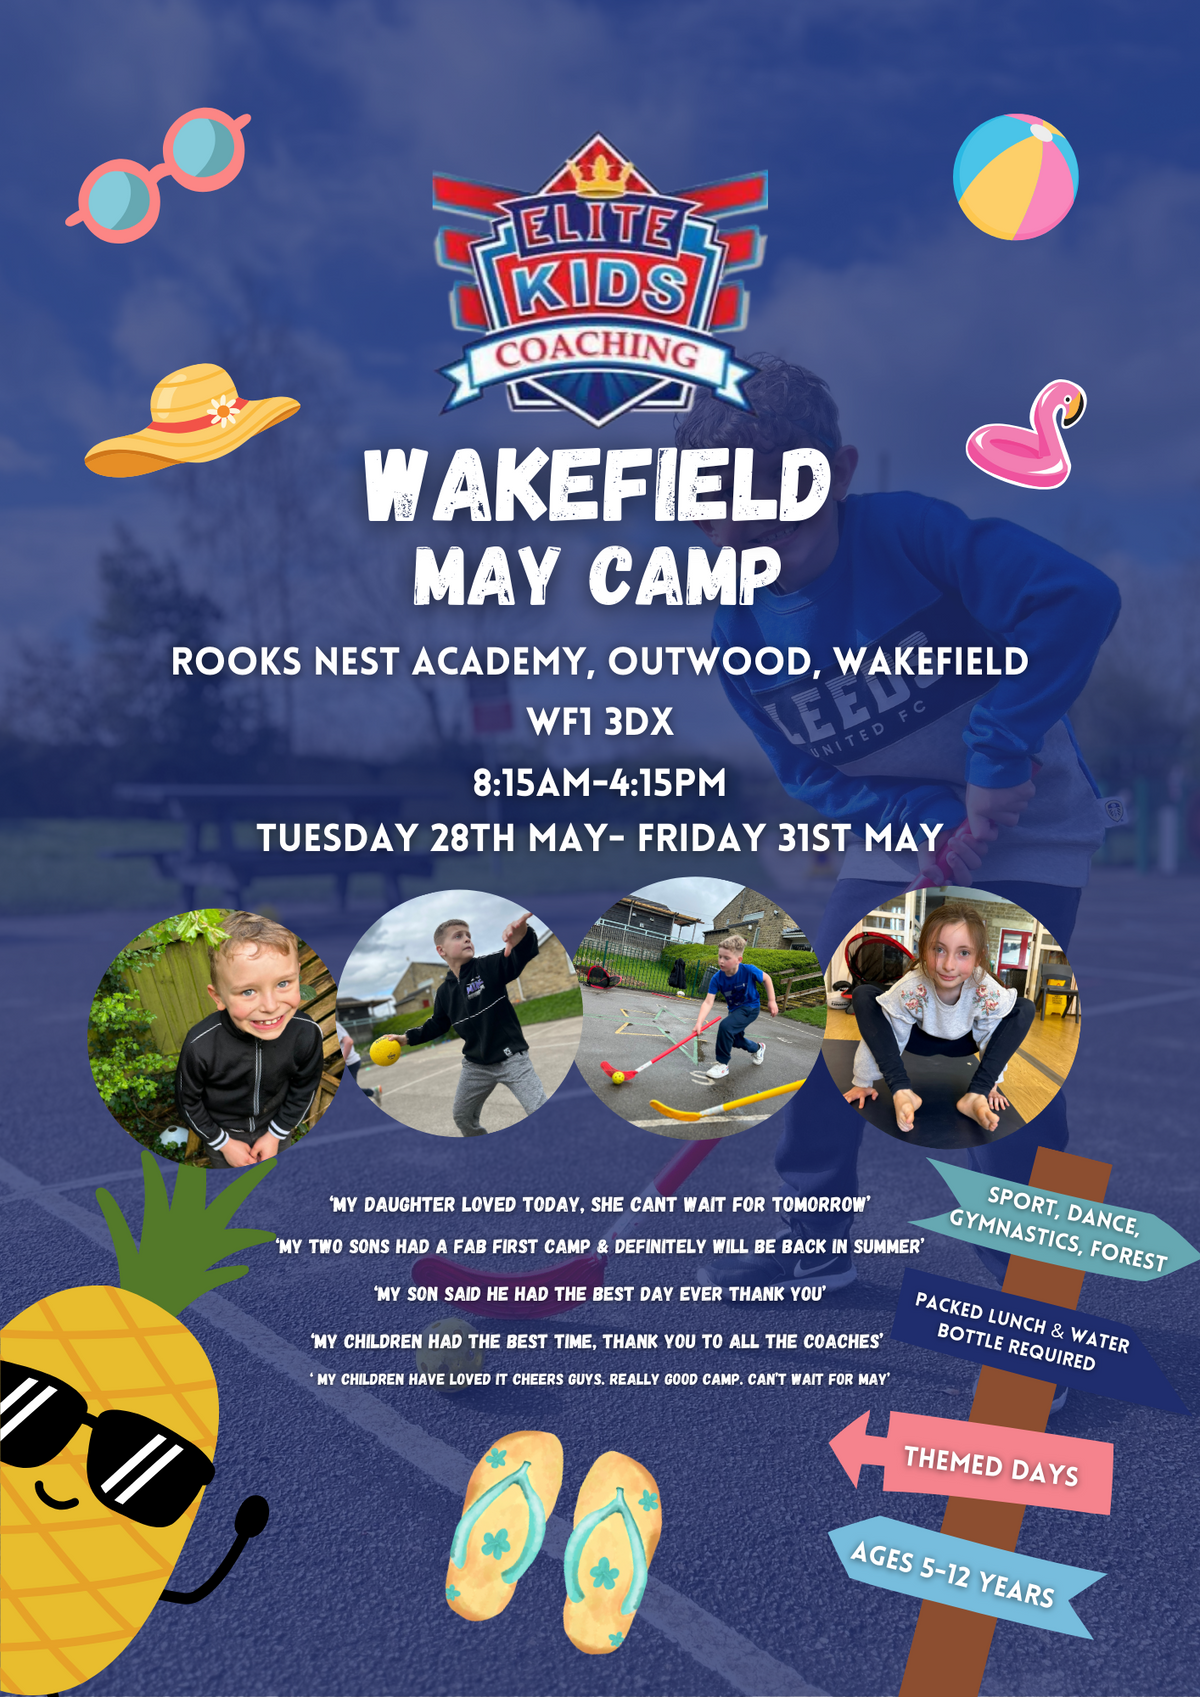 Wakefield May Camp Wednesday 29th May